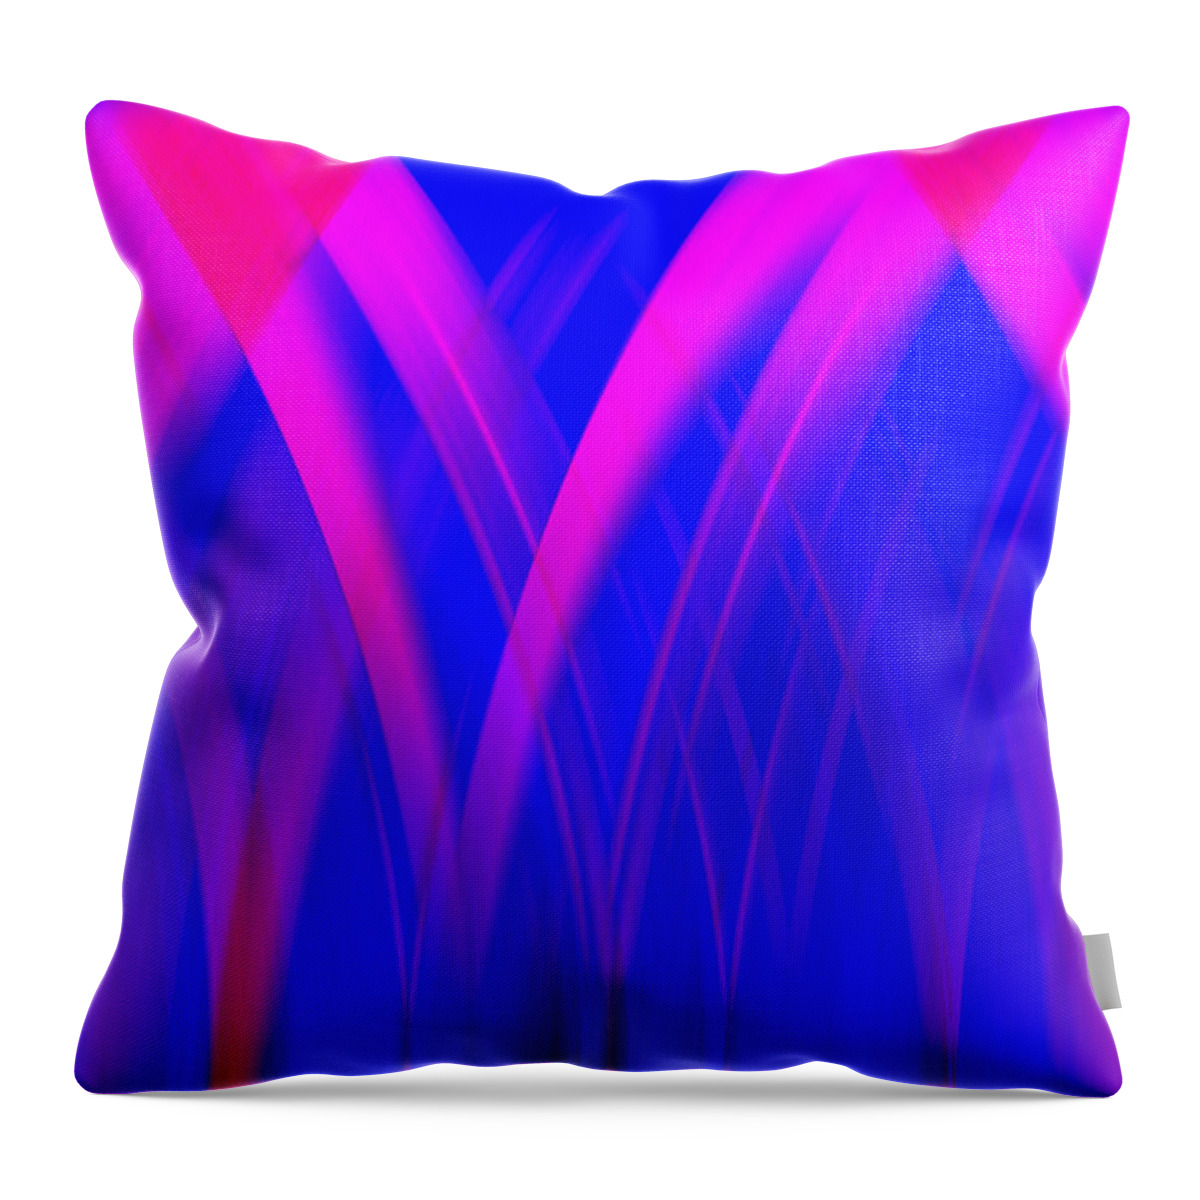 Pink Throw Pillow featuring the digital art Pink Lacing by Carolyn Marshall